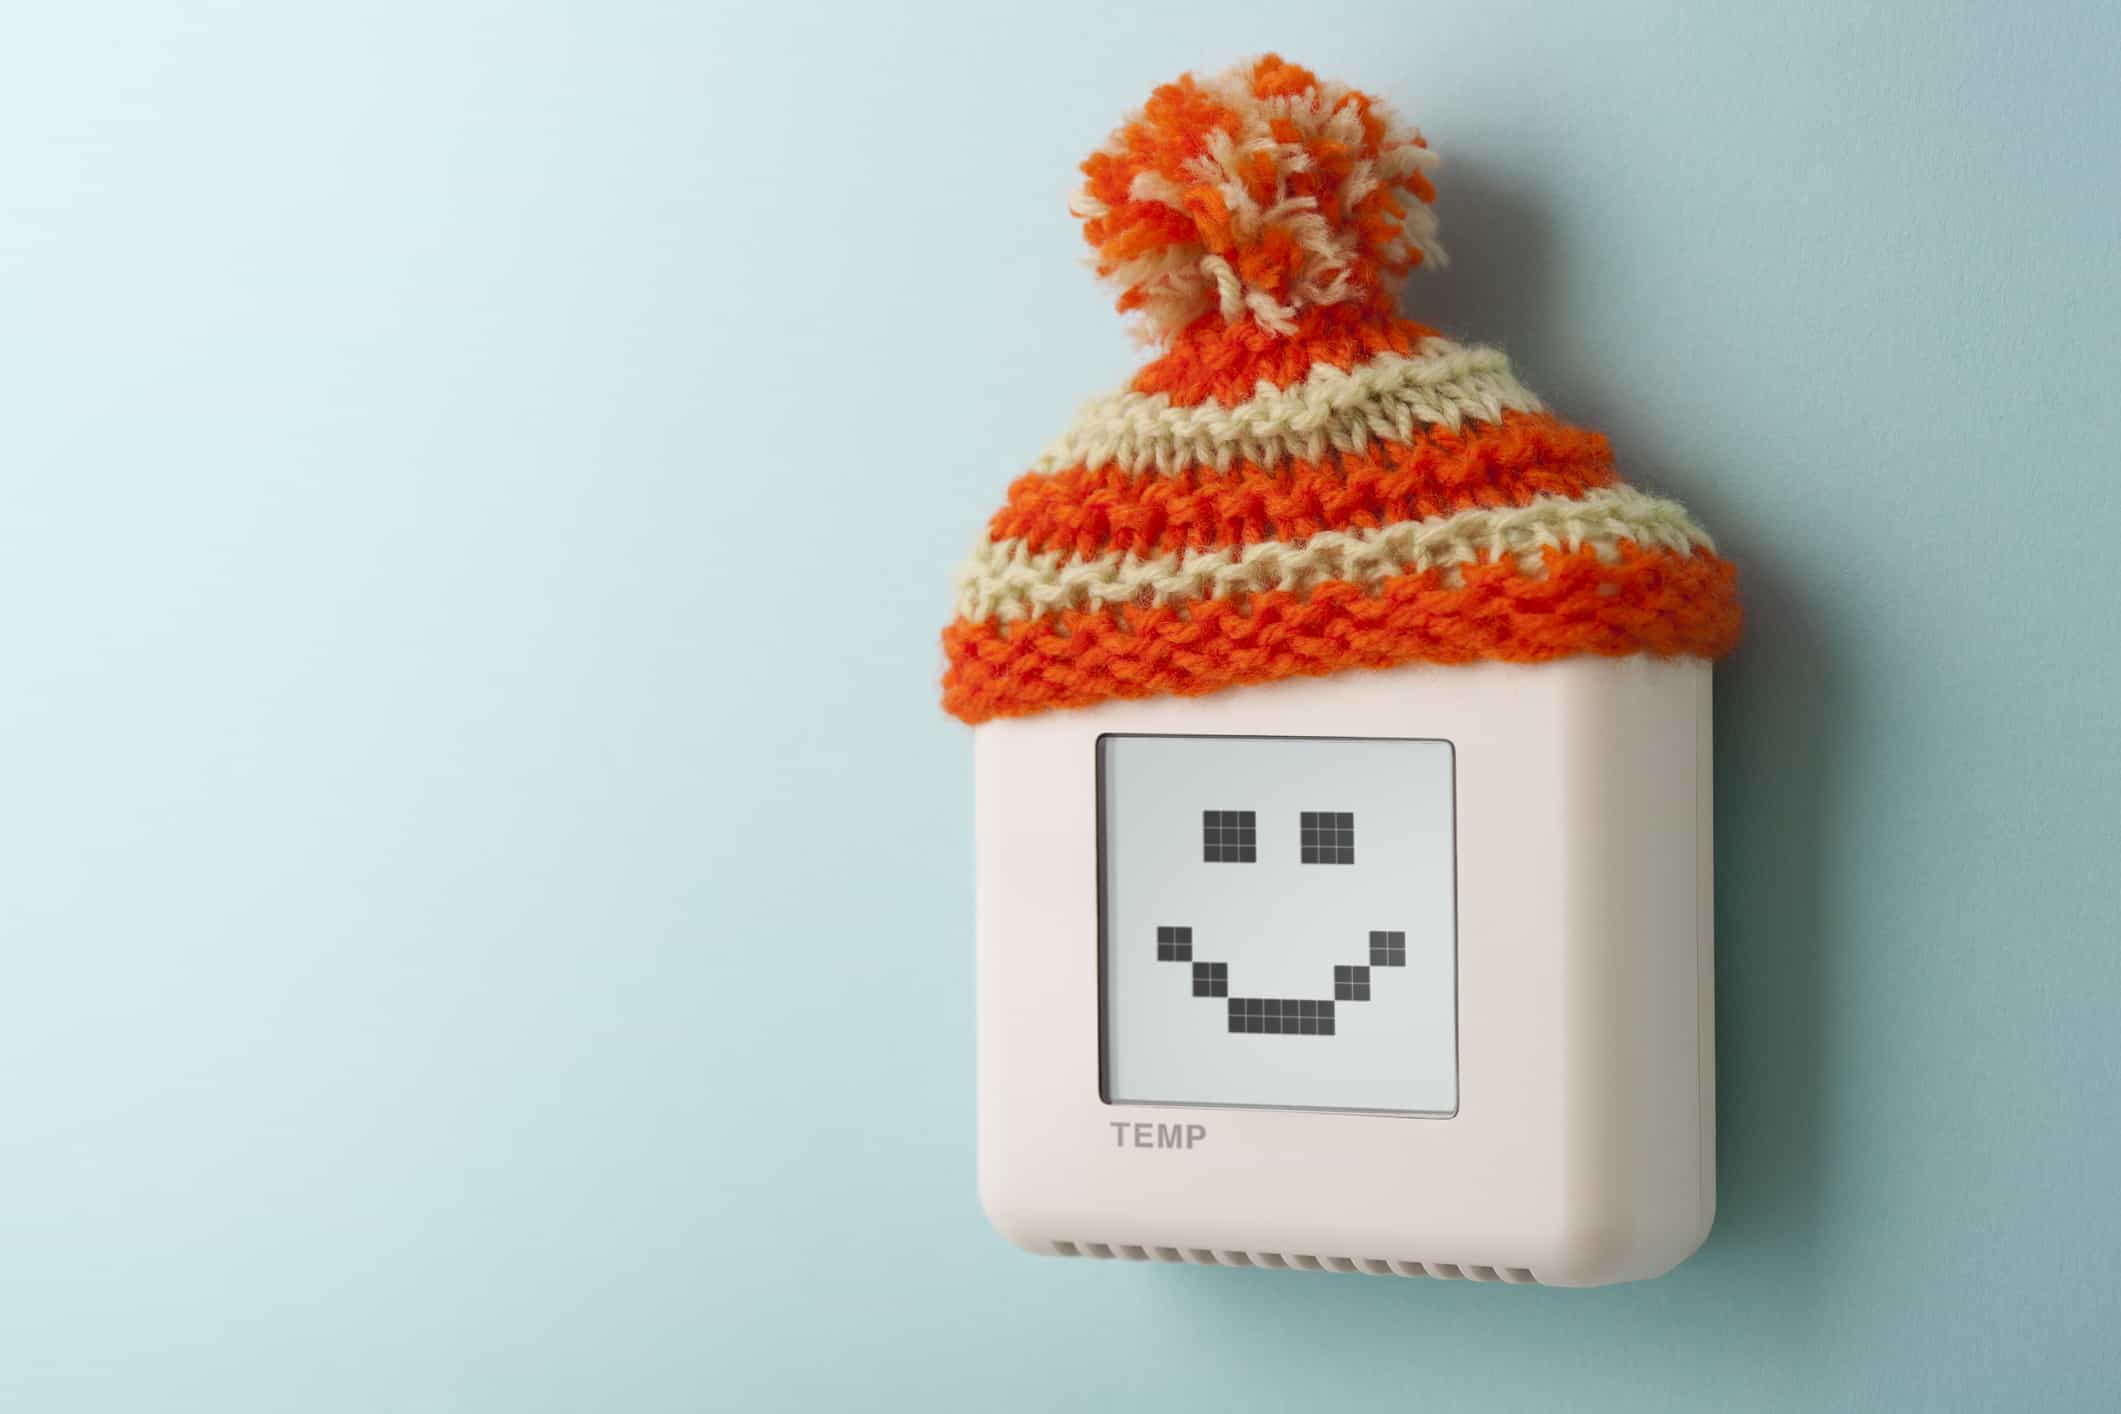 Digital room temperature thermostat with smiley face and wooly hat.